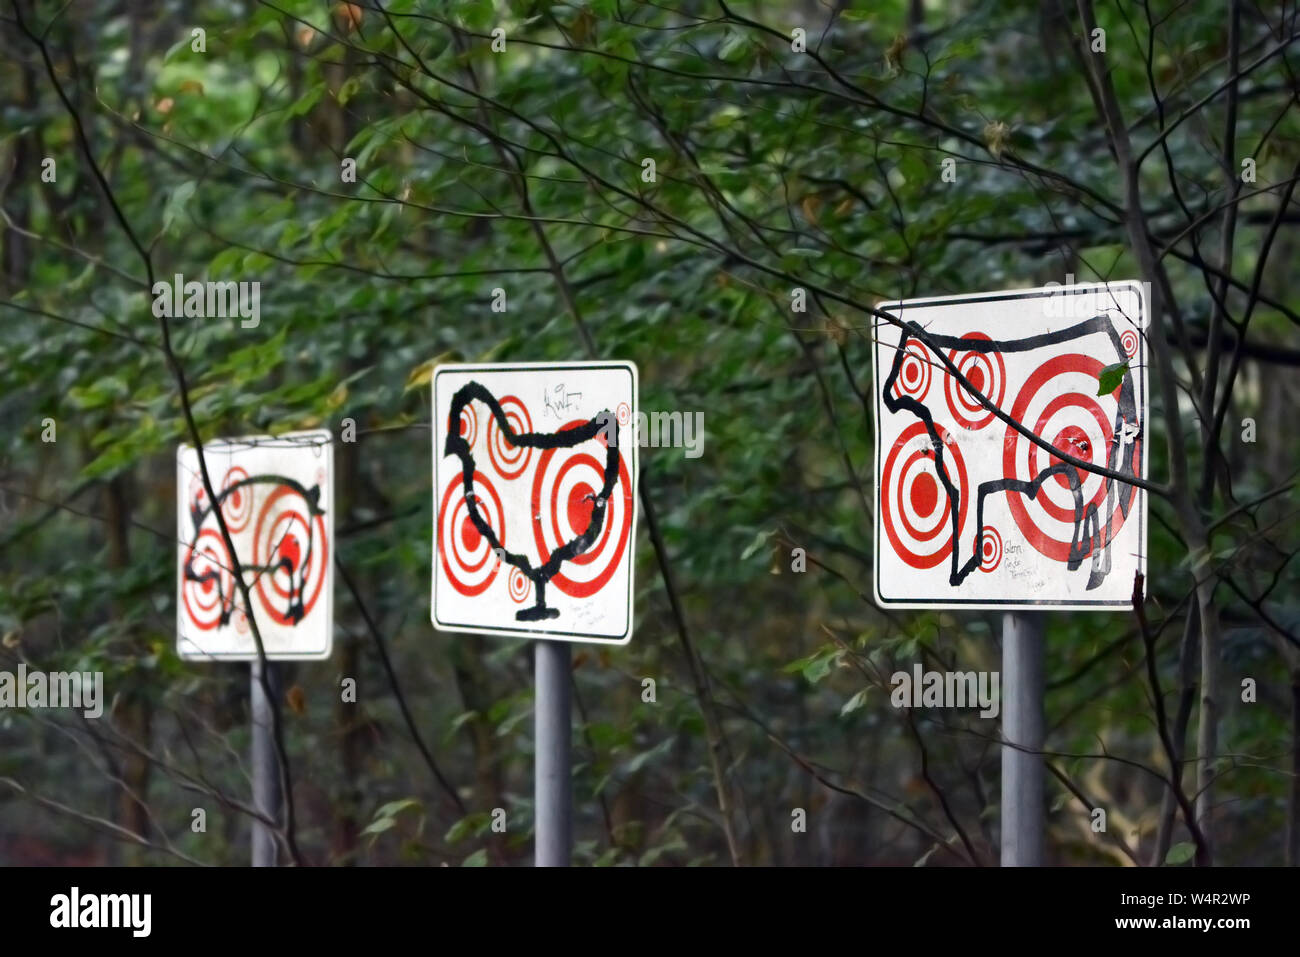 Darmstadt, Germany , Signs with outlines of farm animals like cow, chicken and pig with multiple red target marks on them as part of art exhibition Stock Photo